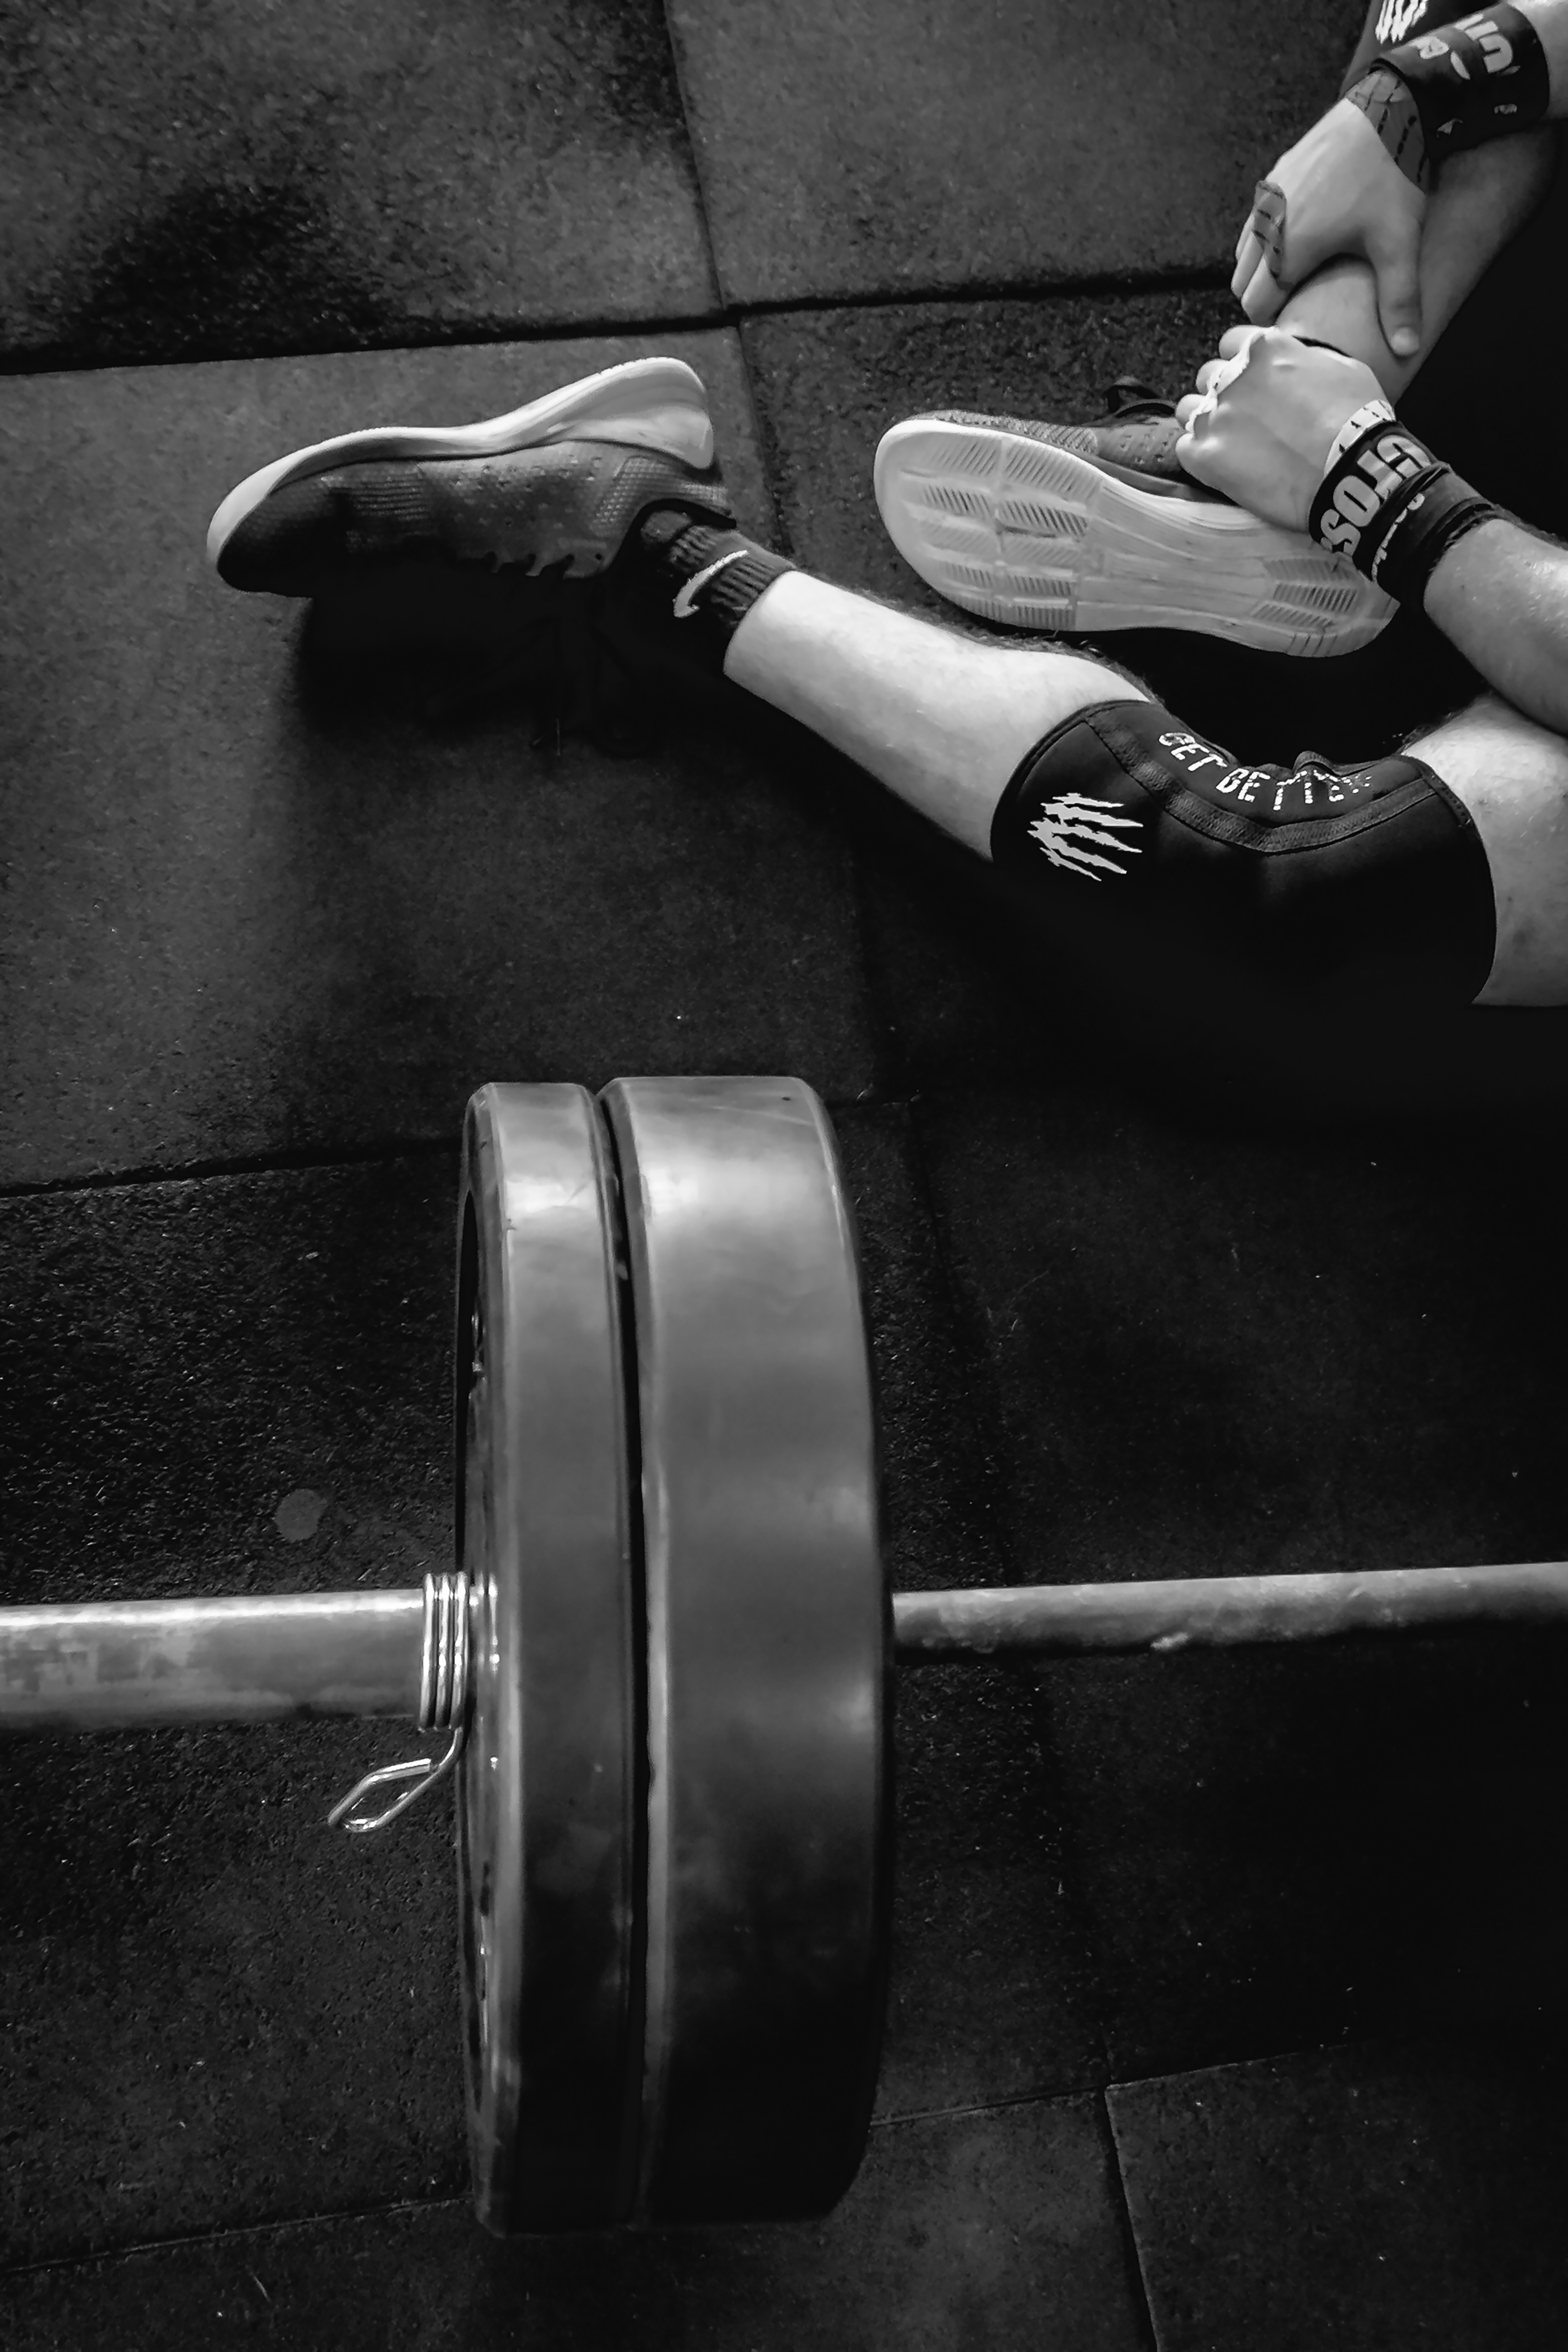 does weightlifting hurt your joints after 50